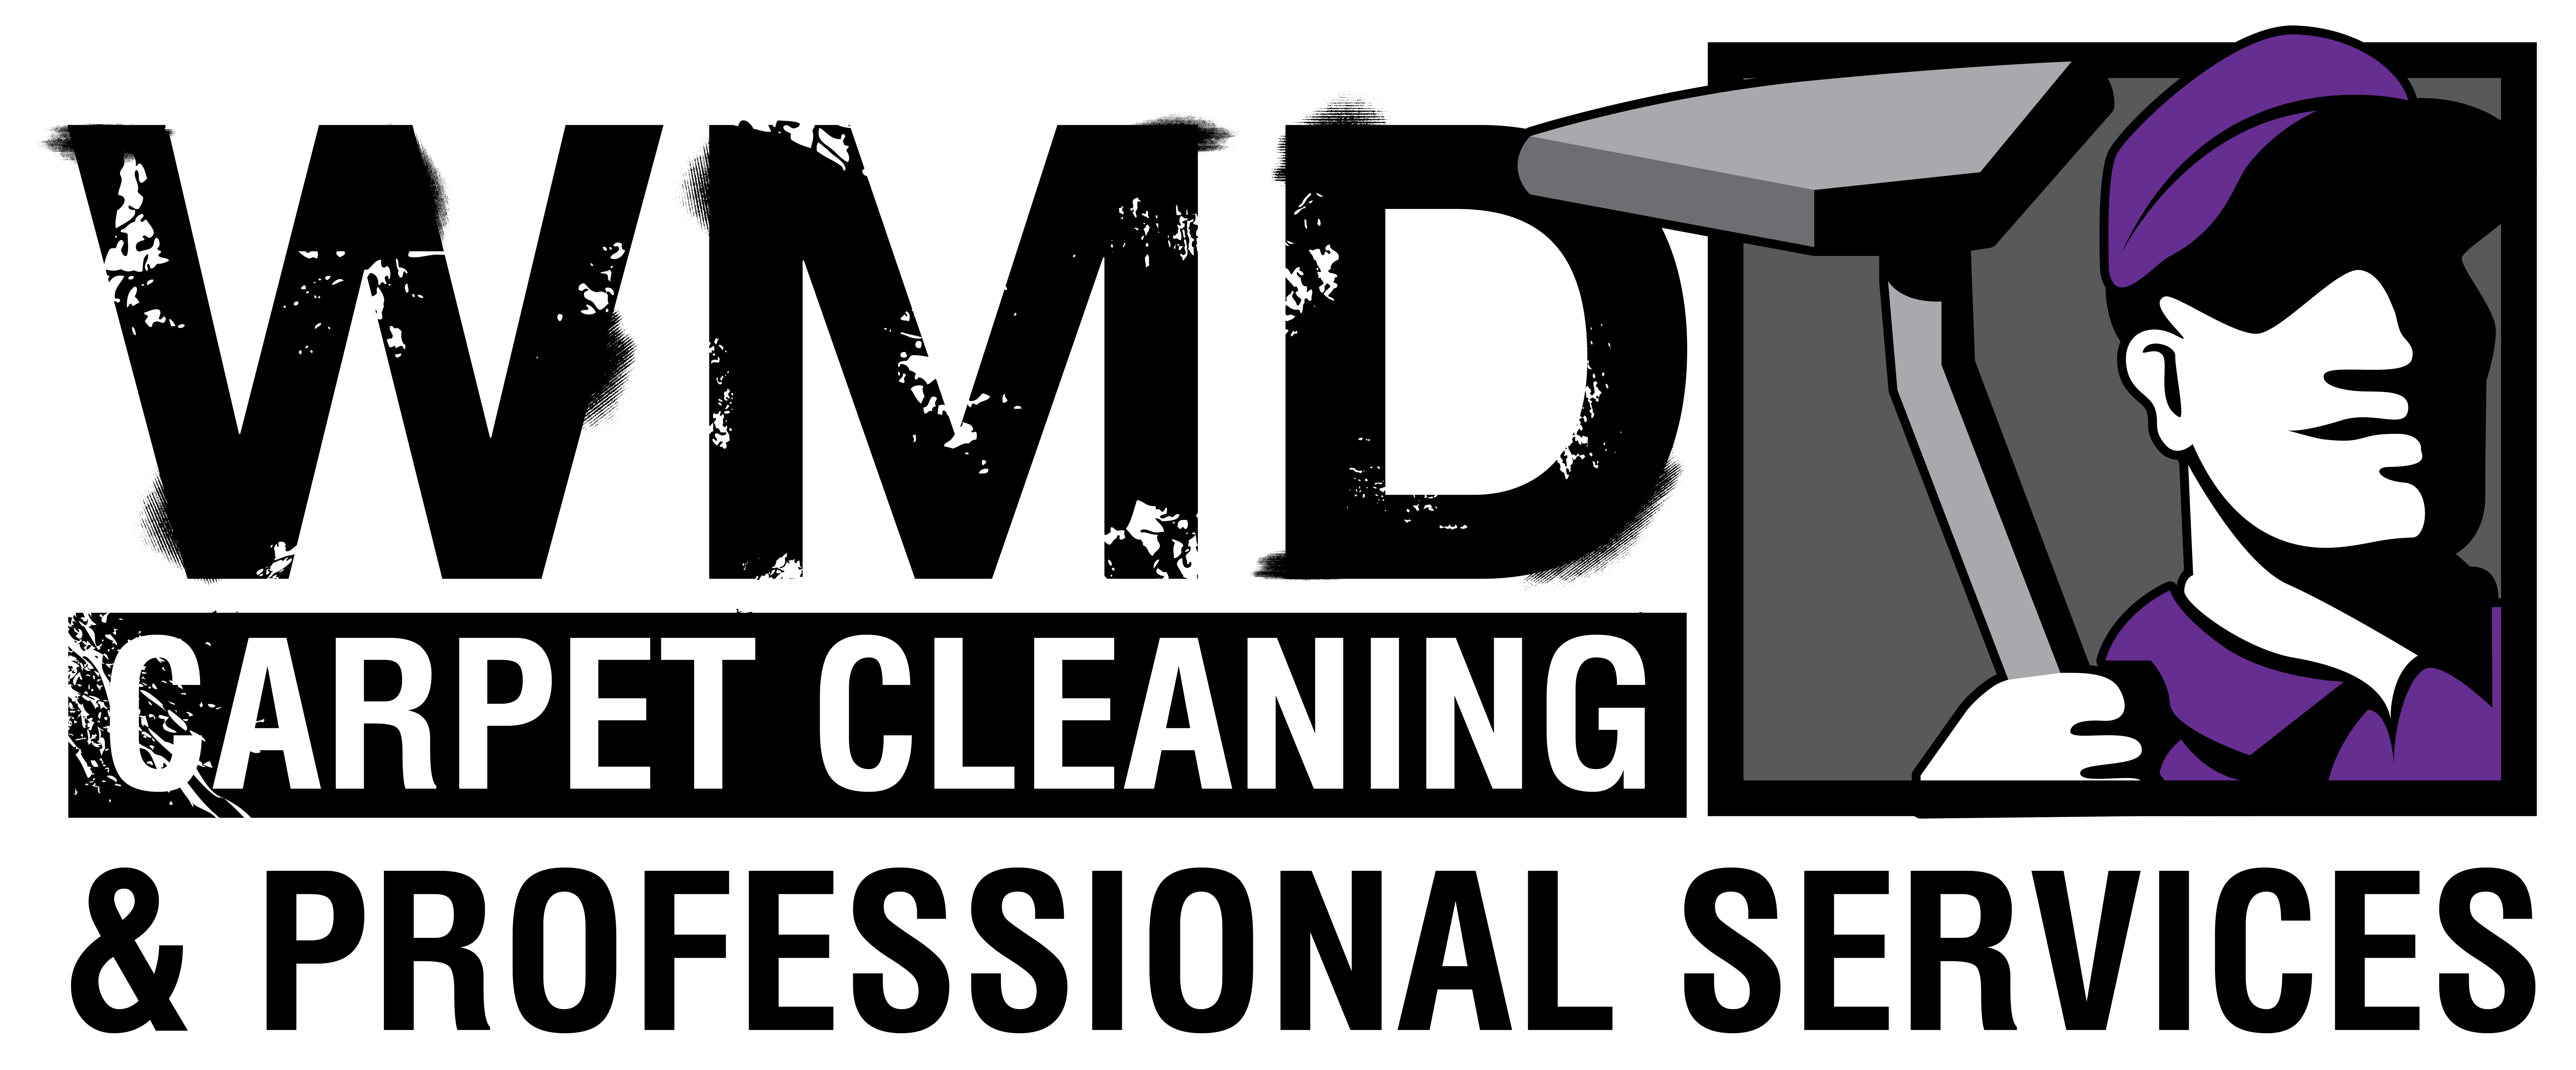 Carpet Cleaning Service Grand Junction Logo